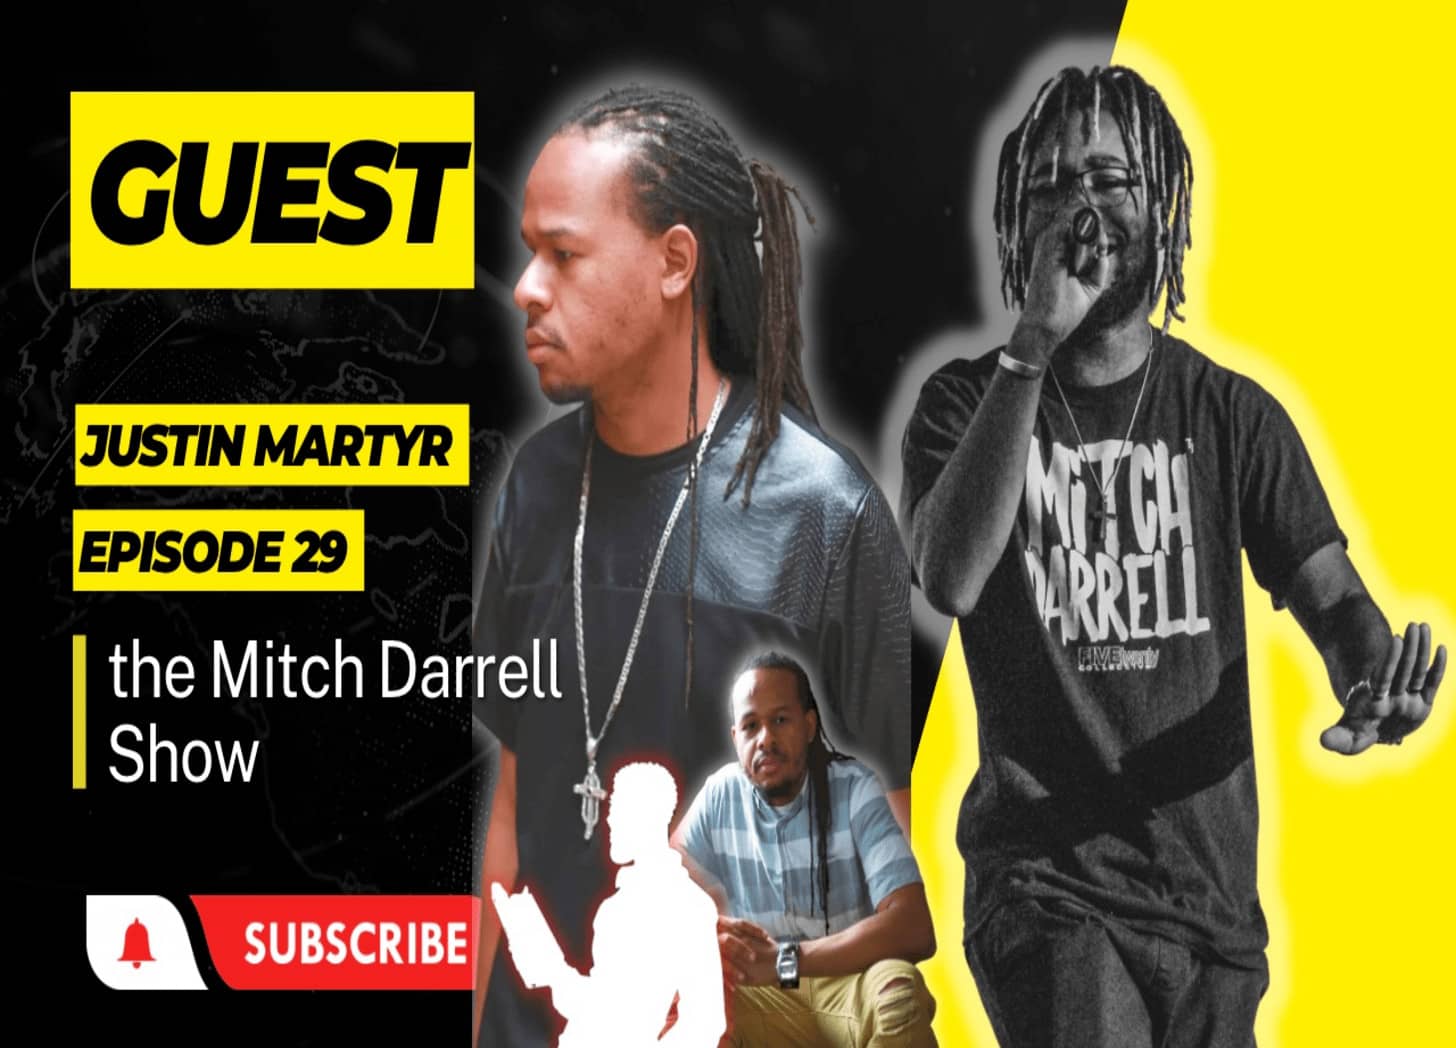 the Mitch Darrell Show Episode 28 with Guest Alcott